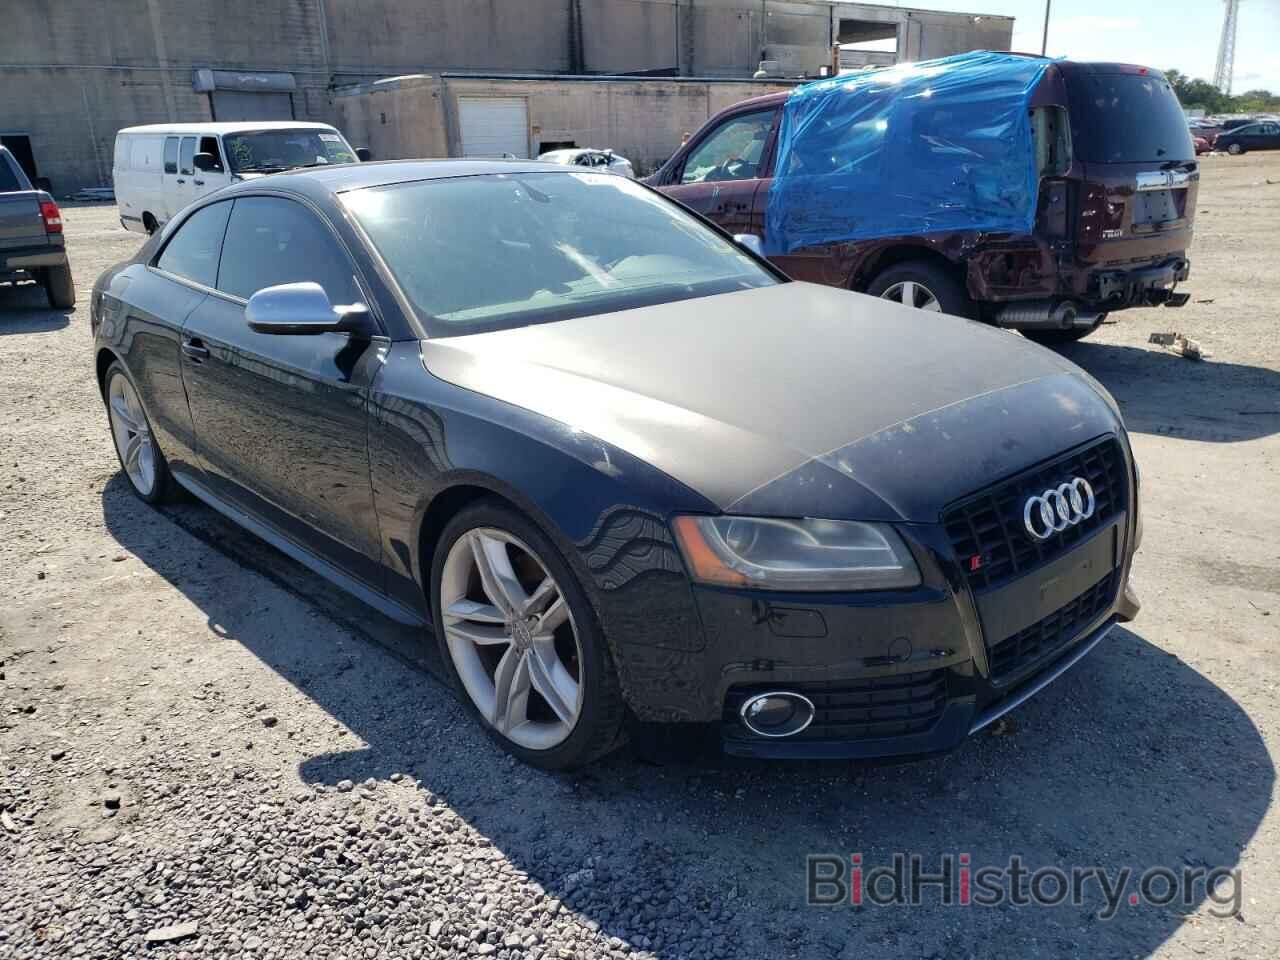 Photo WAUVVAFR0BA069722 - AUDI S5/RS5 2011